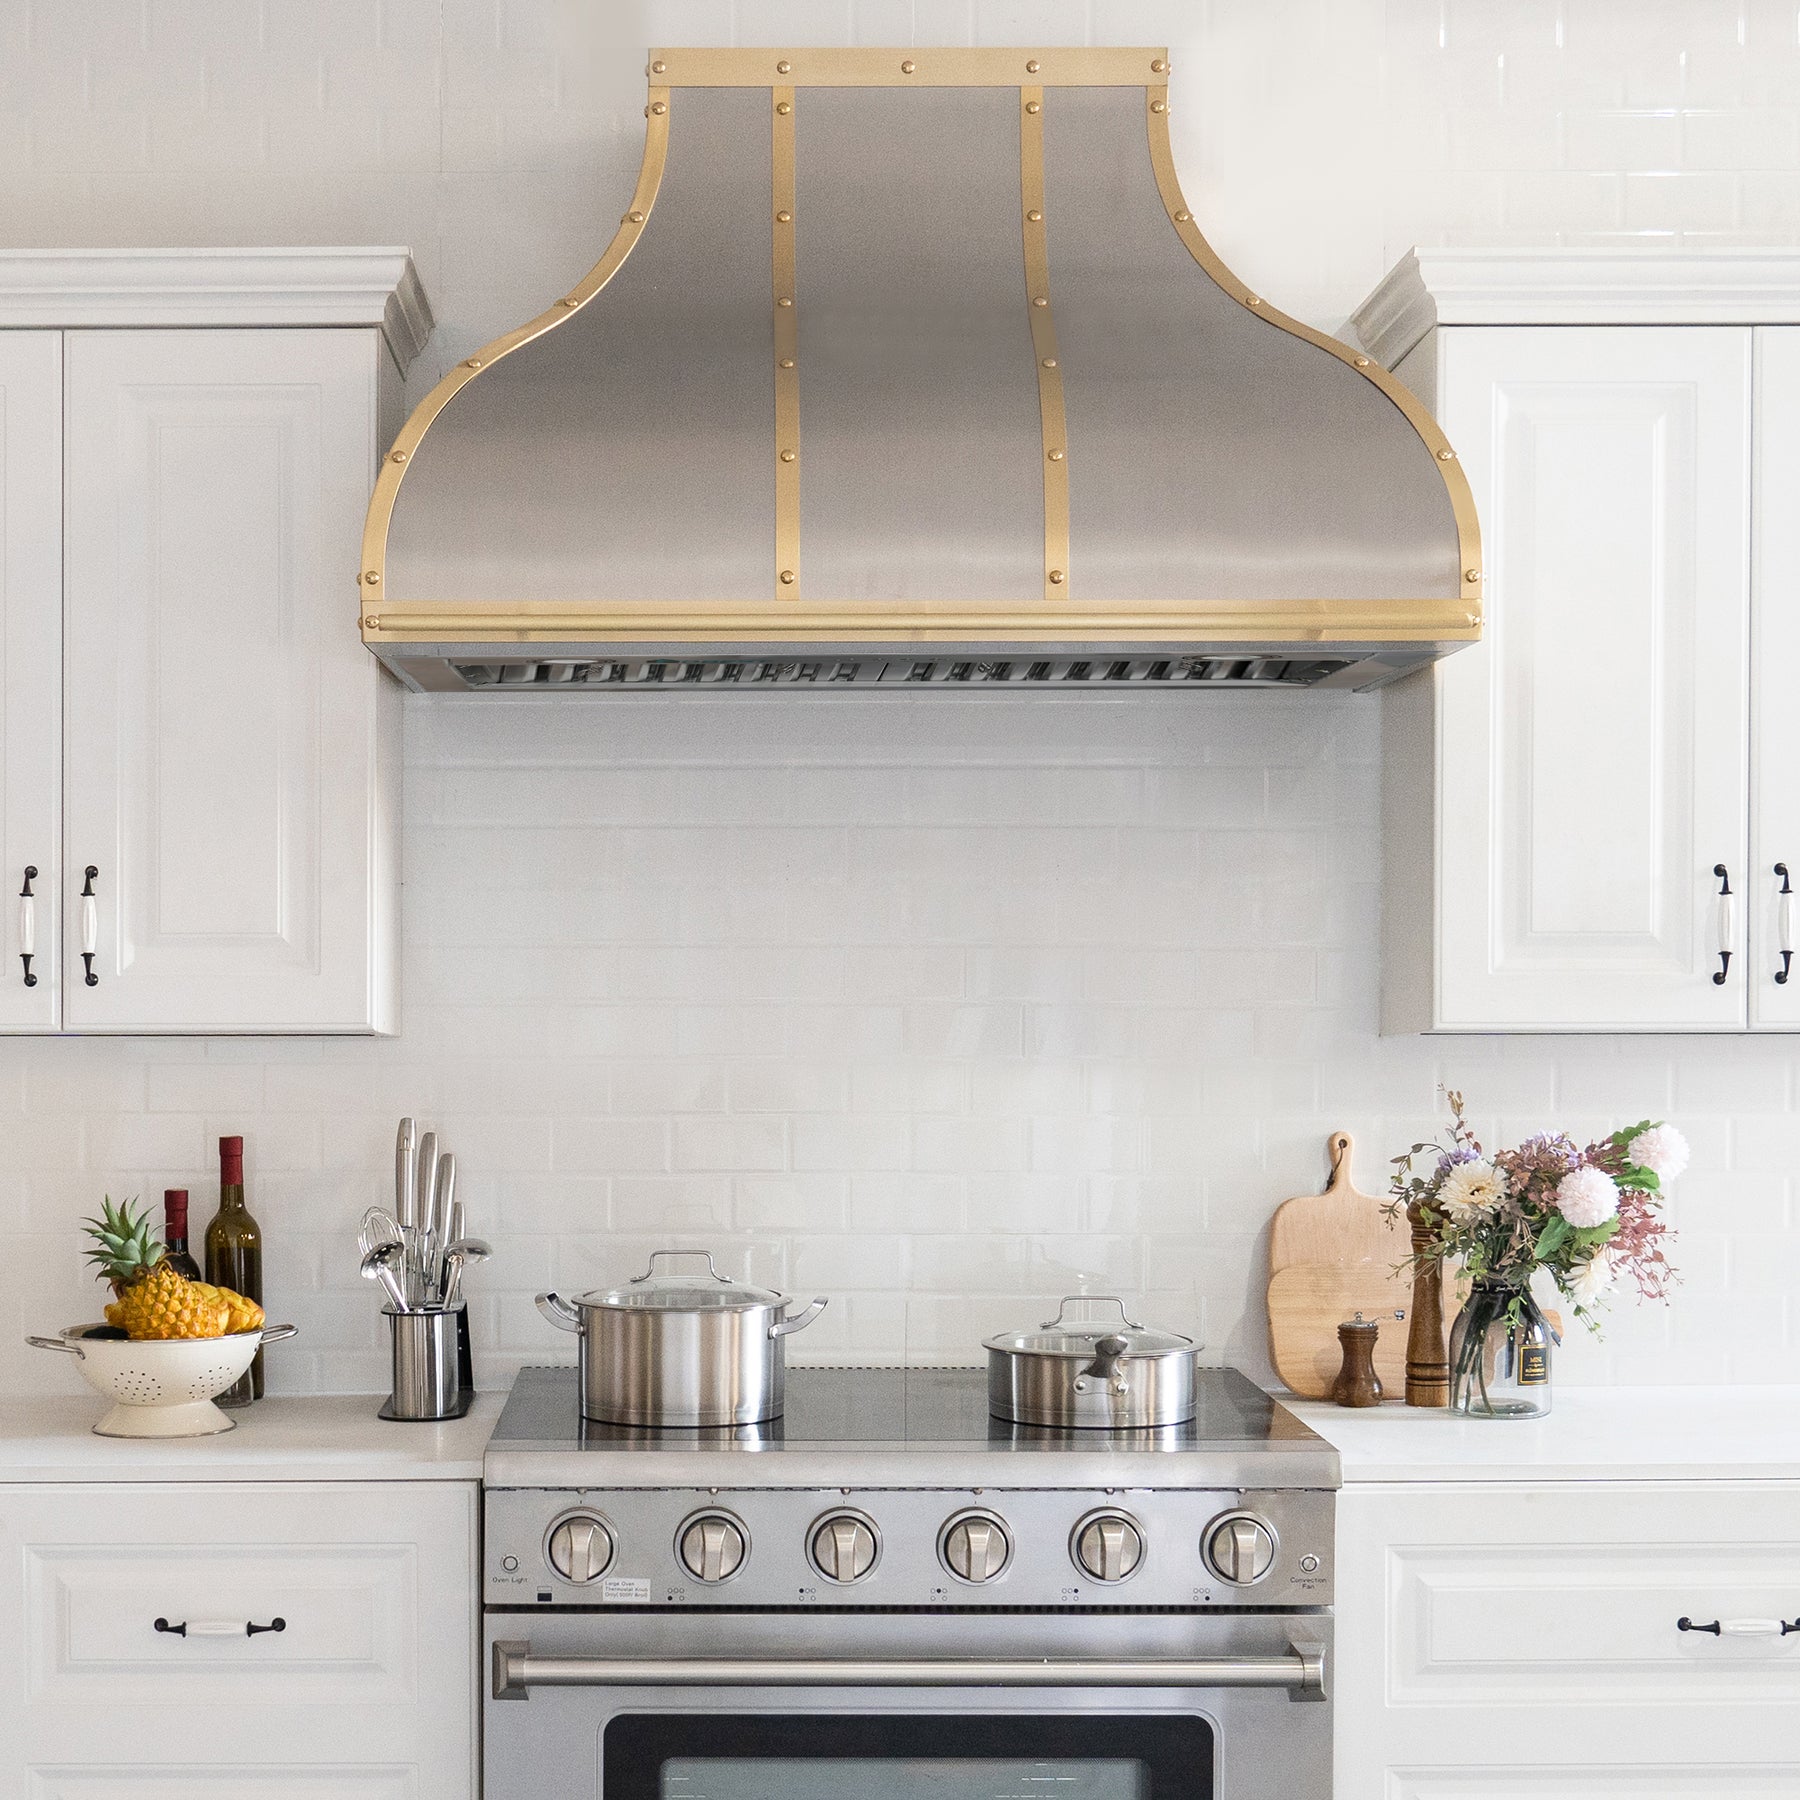 Fobest stainless steel range hood with brushed brass straps